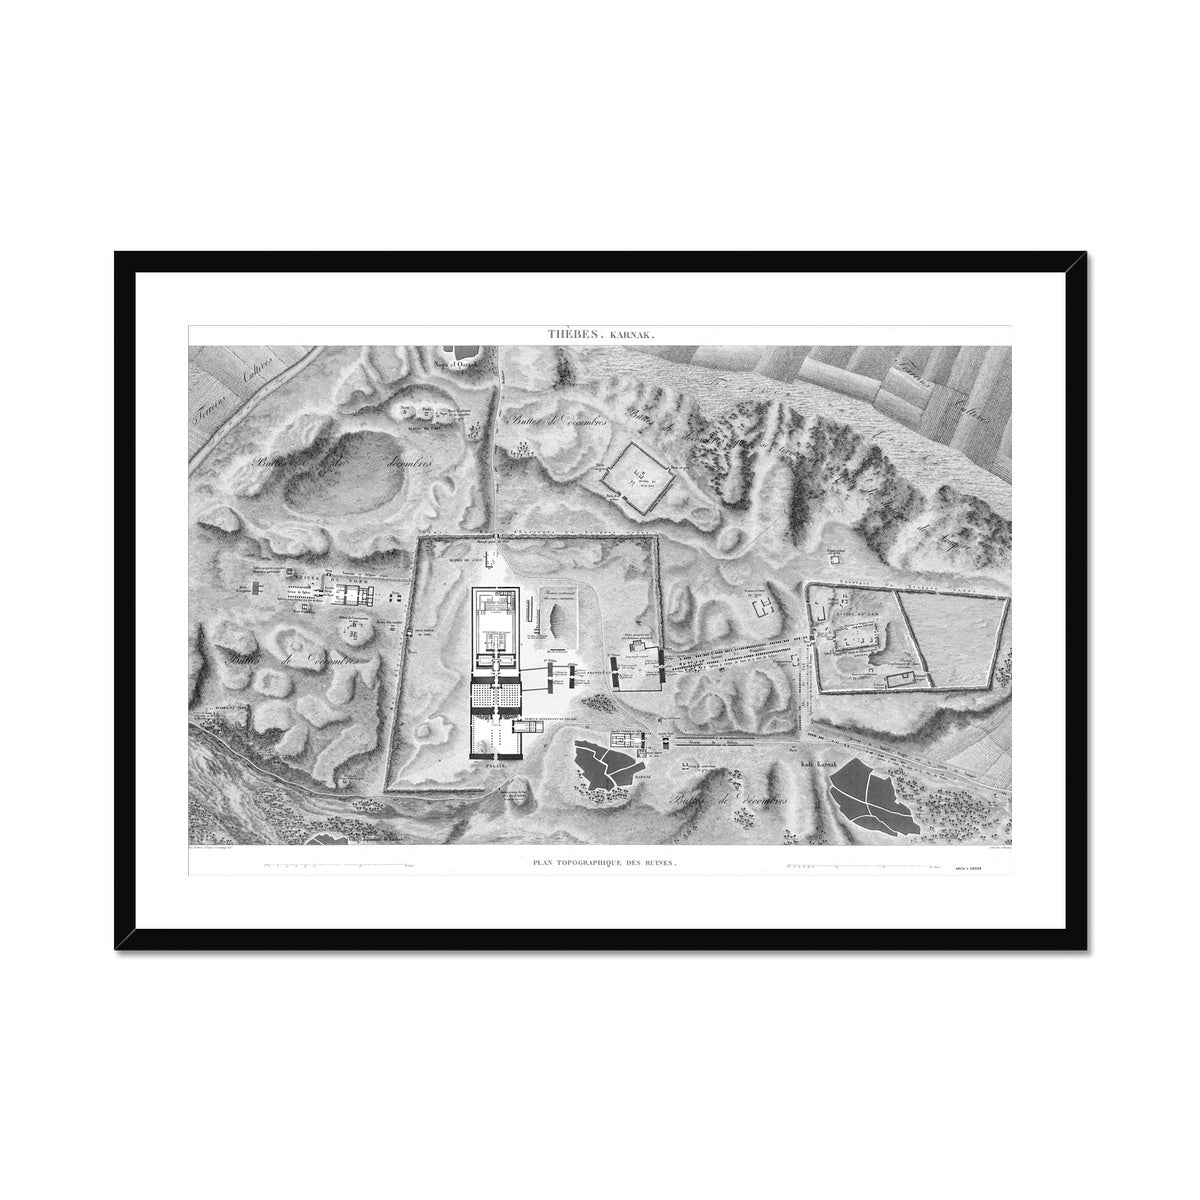 Topographic Map of the Ruins - Karnak - Thebes Egypt -  Framed & Mounted Print